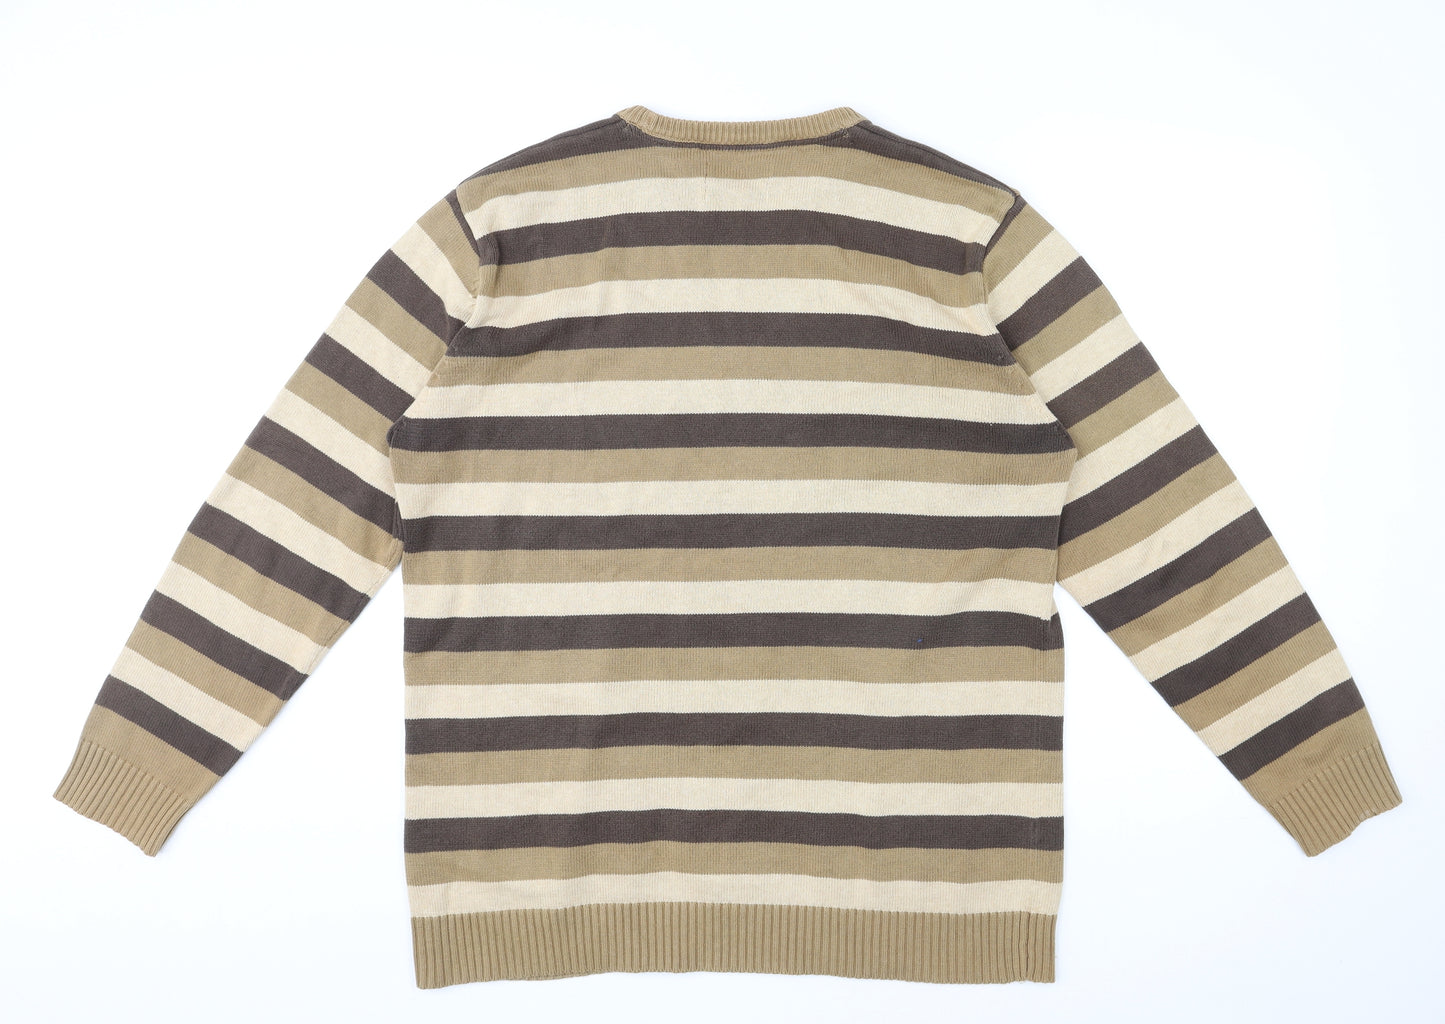 Maine New England Mens Brown Round Neck Striped Cotton Pullover Jumper Size L Long Sleeve